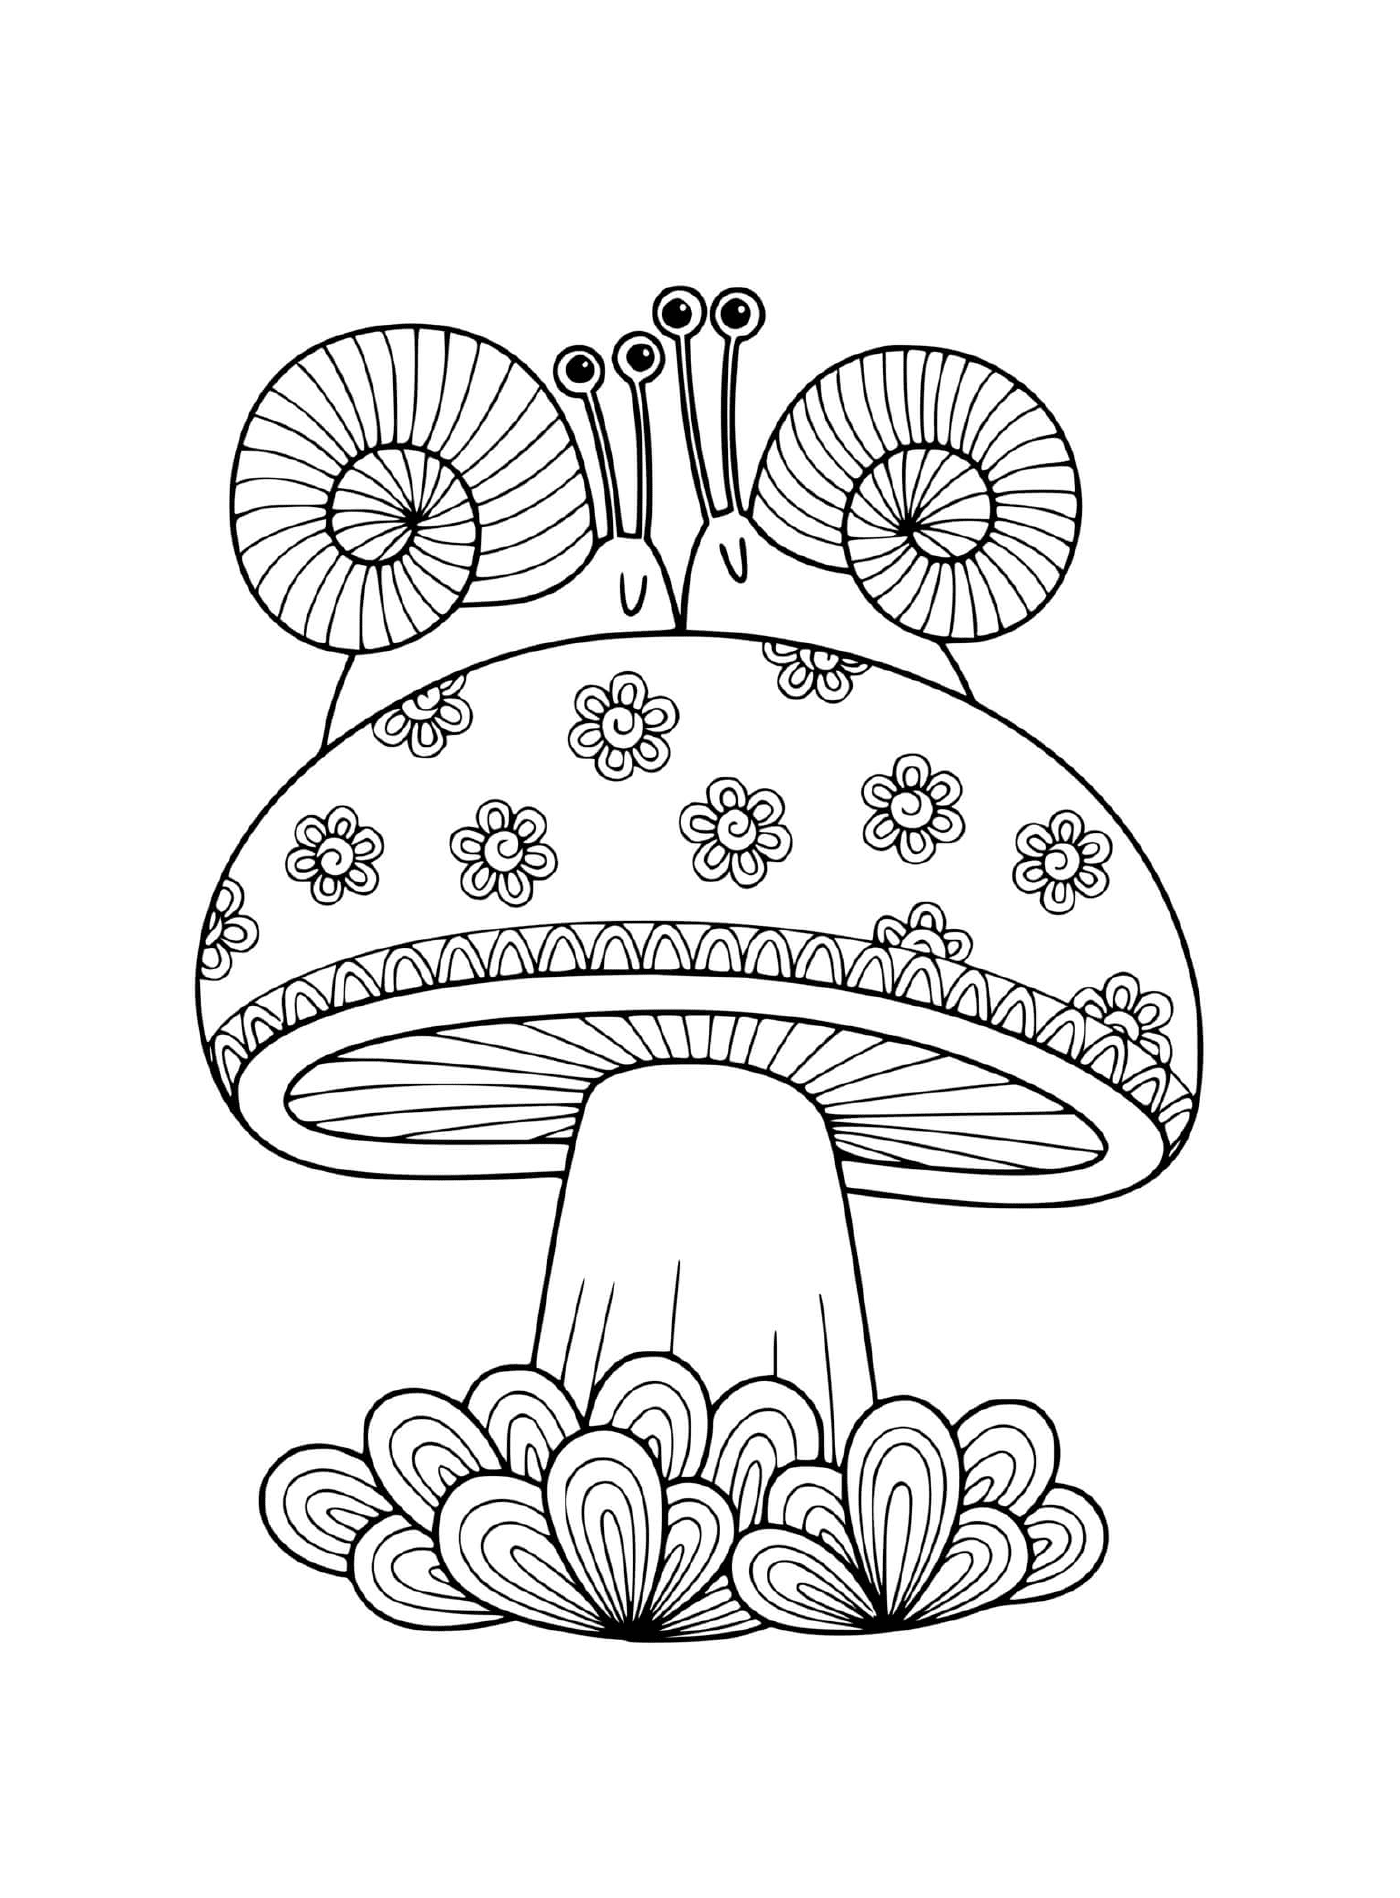  Adult mushroom surrounded by two snails 